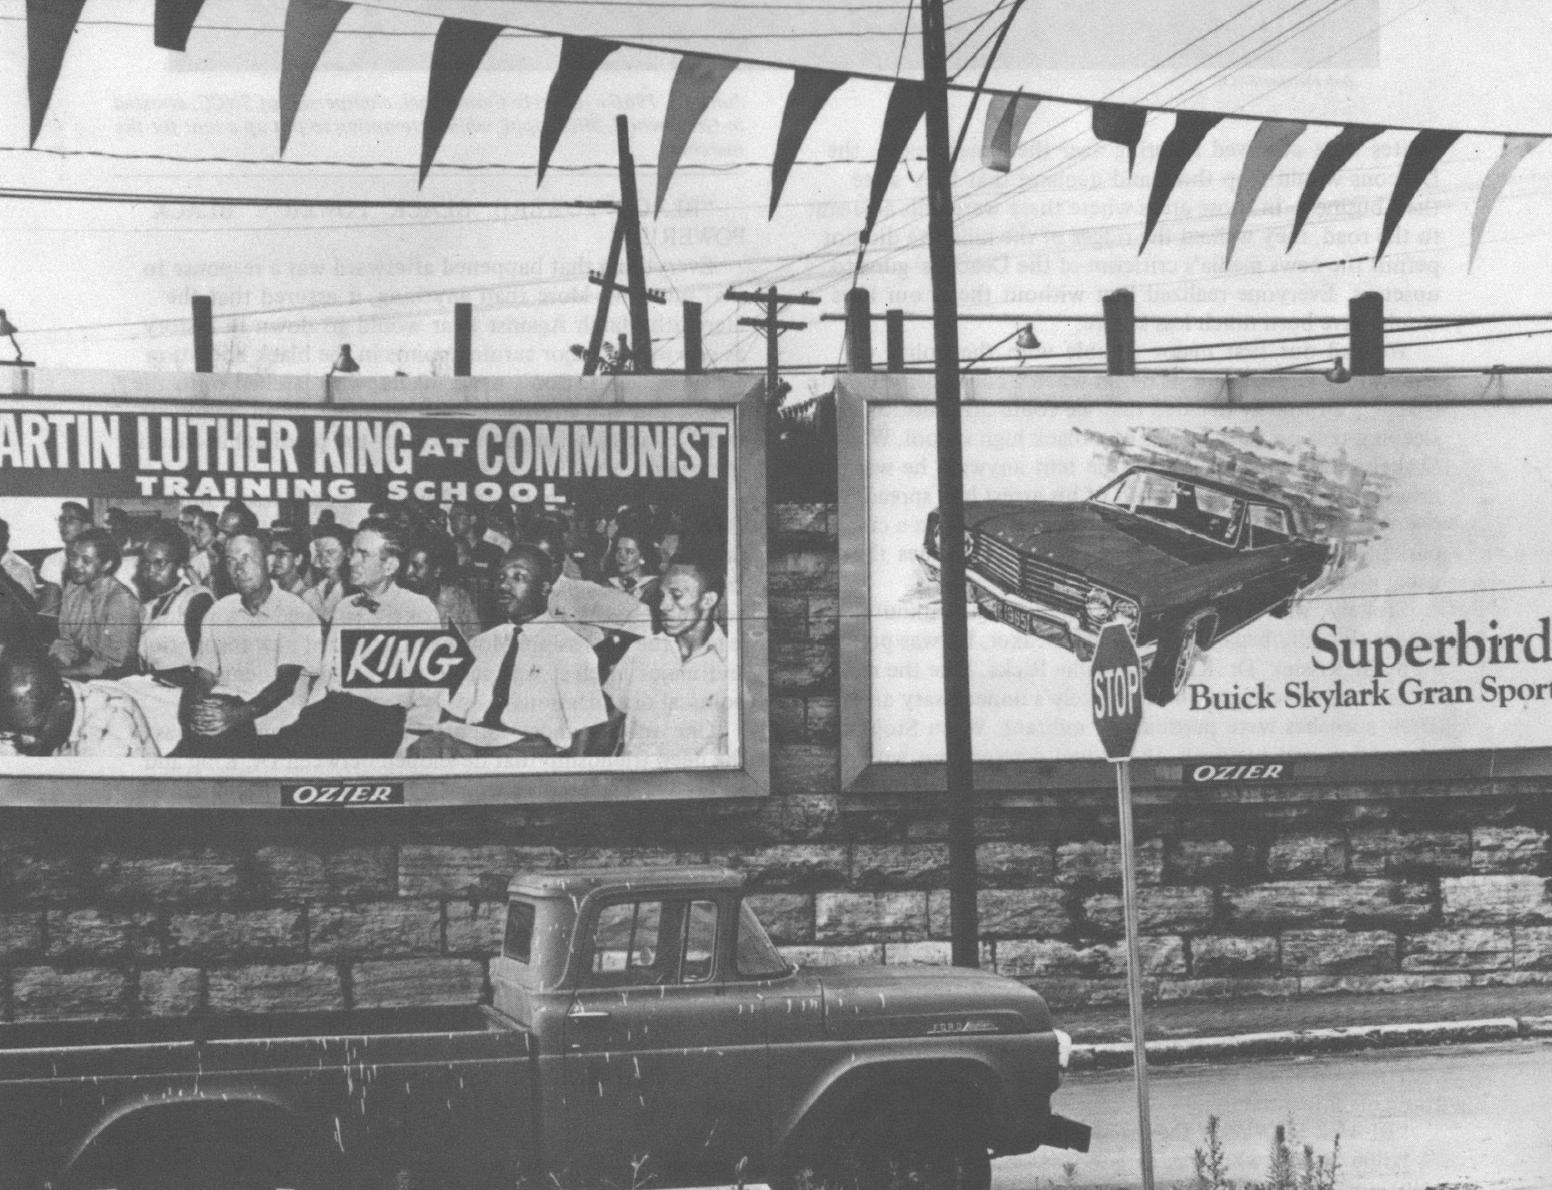 Black and white photo of truck parked in front of billboard that reads "Martin Luther King at Communist Training School"